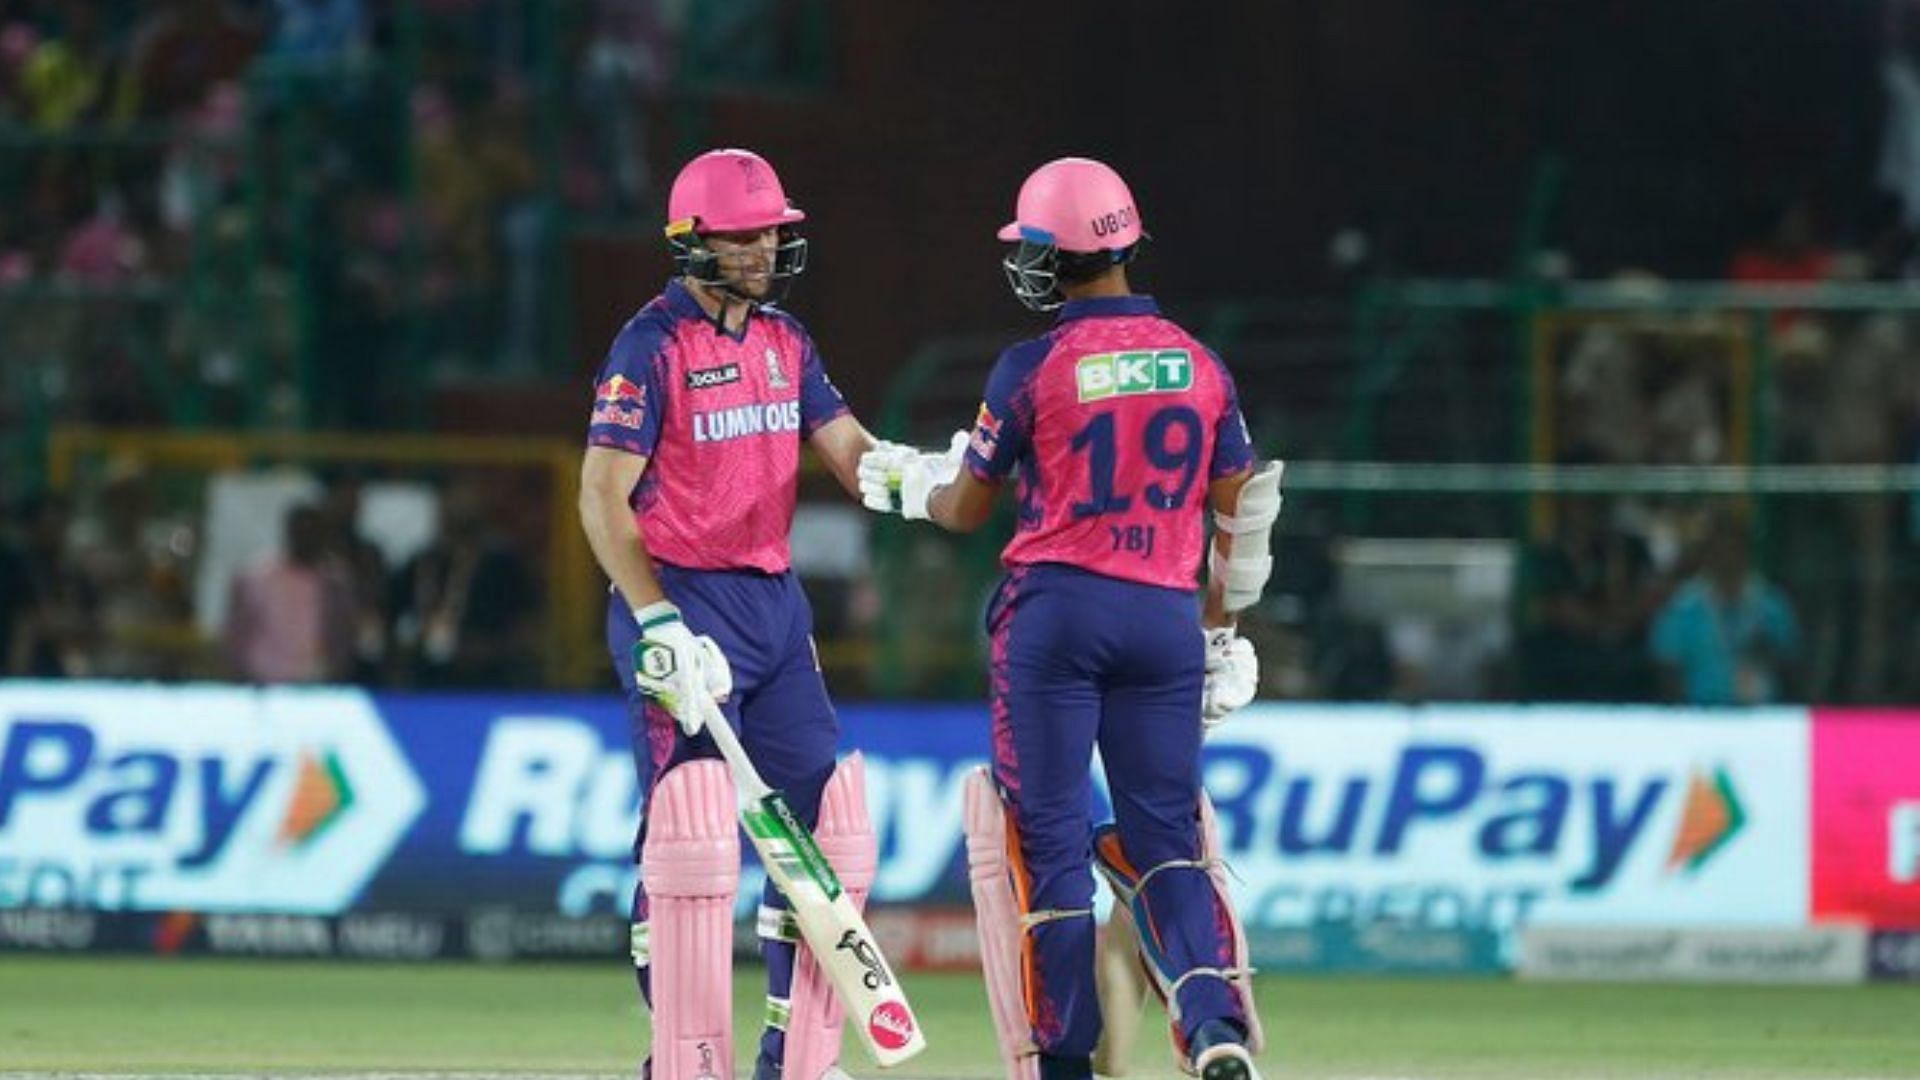 Buttler and Jaiswal holds the key for Rajasthan at the top.